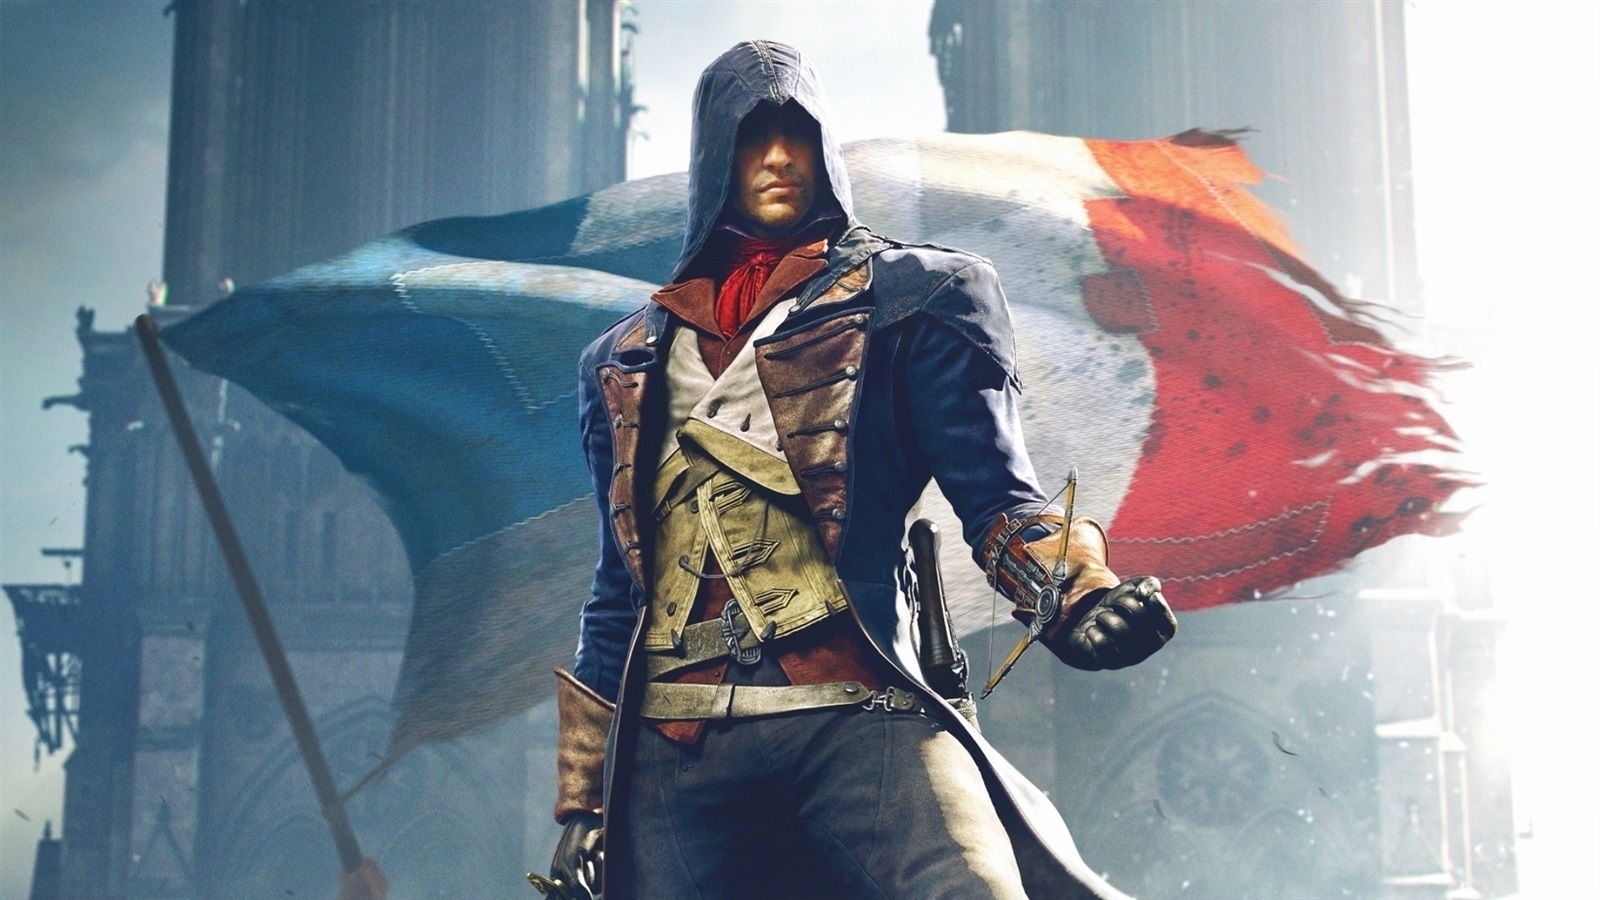 Media: Ubisoft may team up with private investors to keep its independence